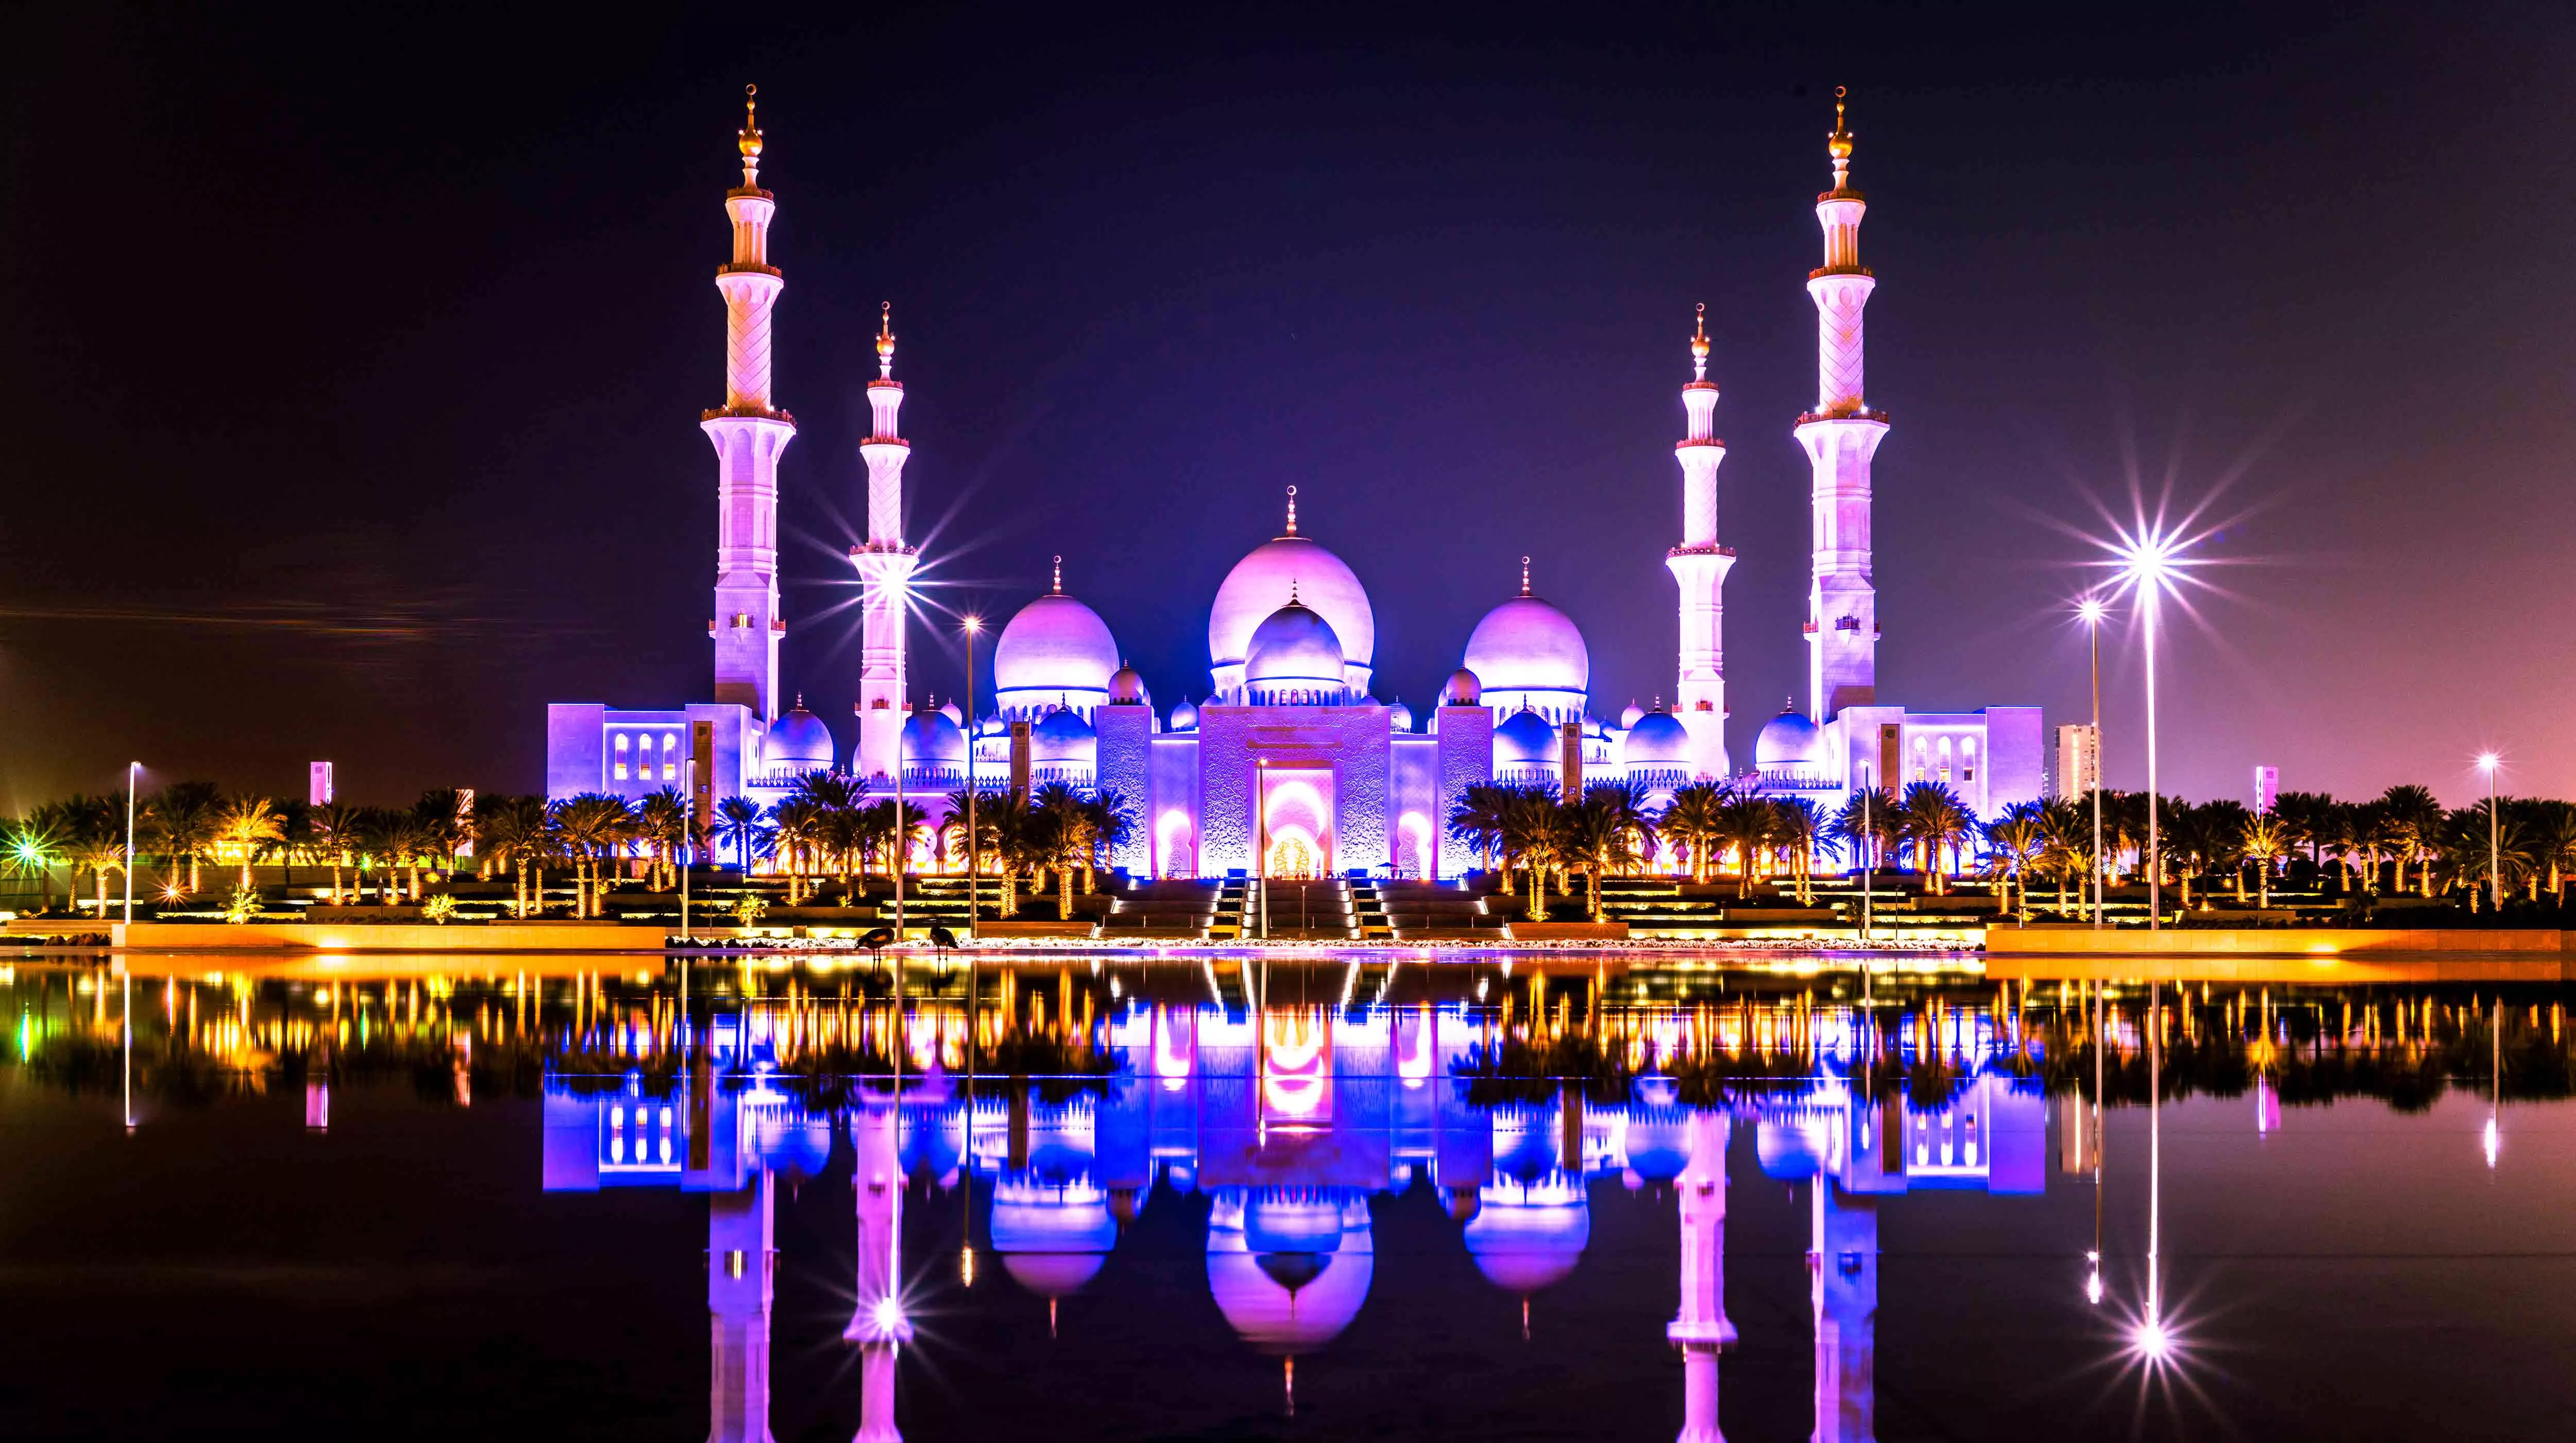 Sheikh Zayed Grand Mosque in United Arab Emirates, Middle East | Architecture - Rated 4.7